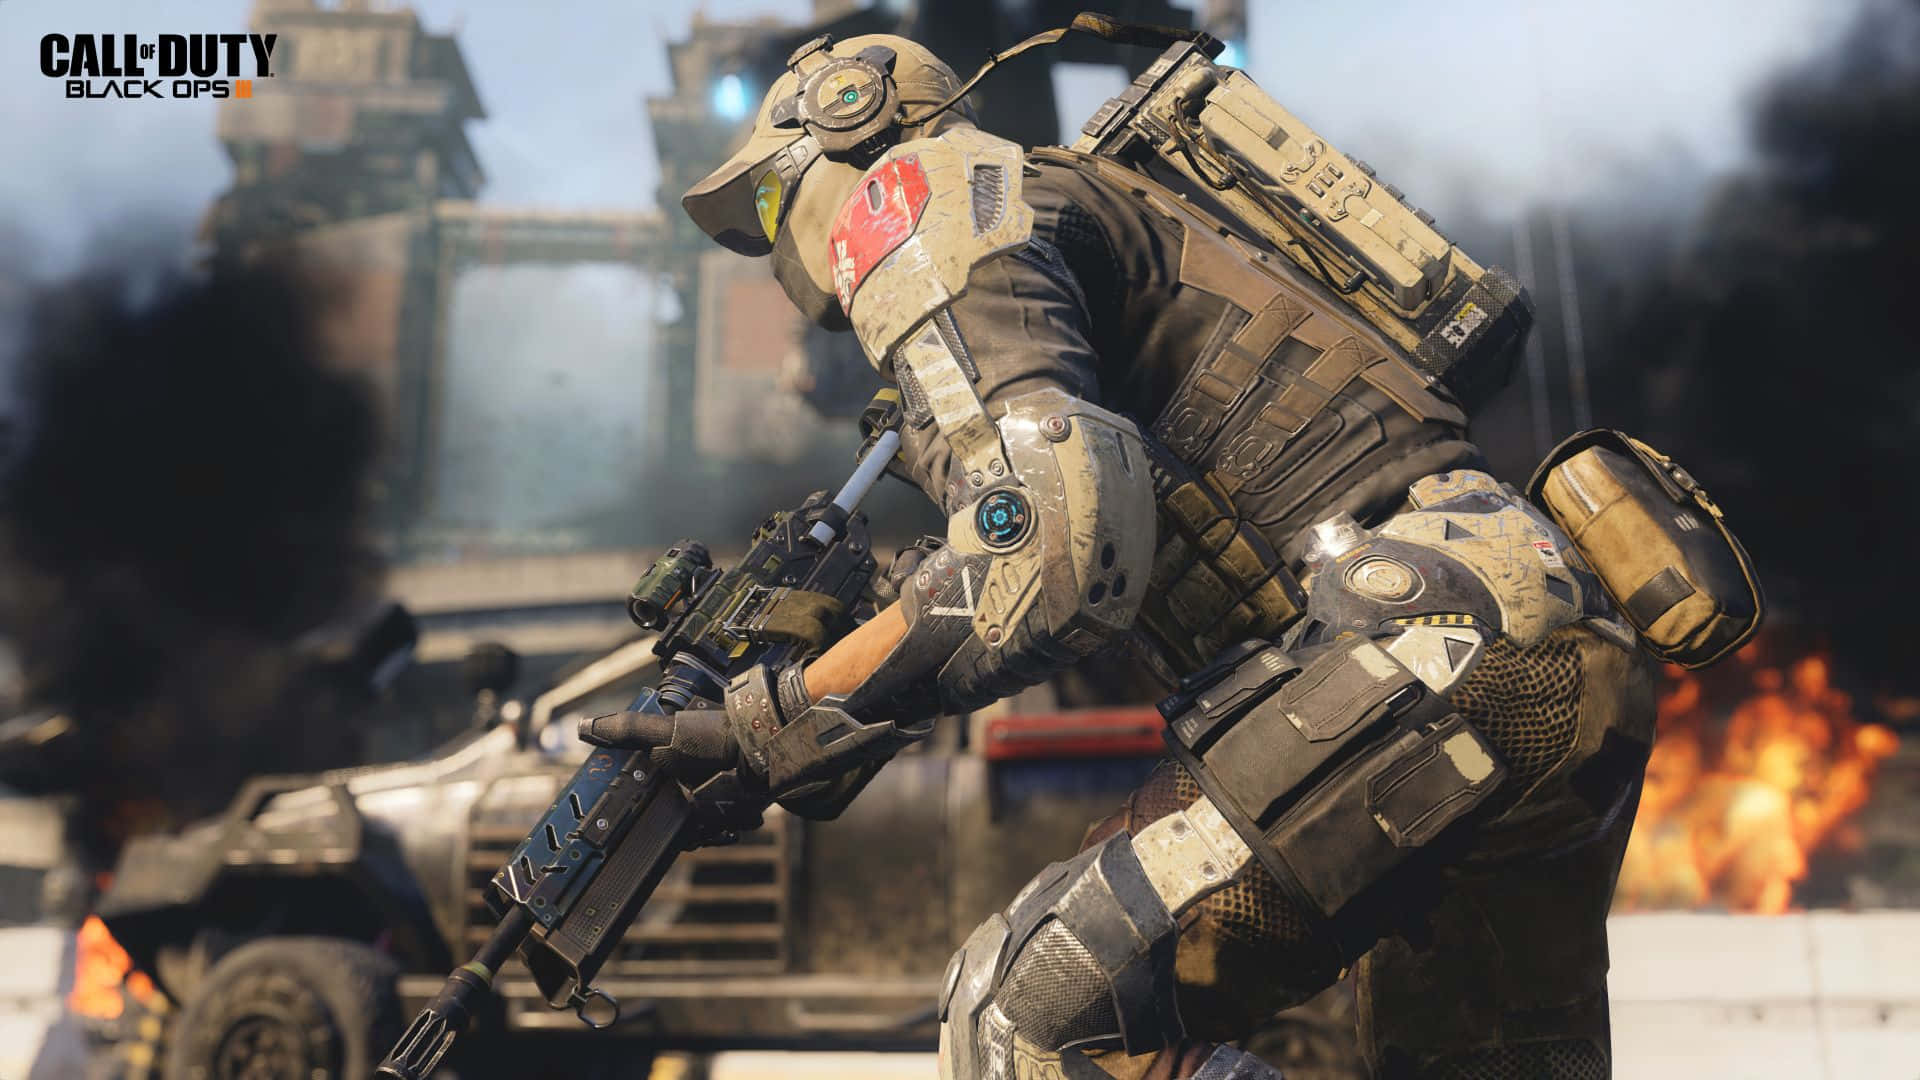 “Feel the intensity of combat in Call of Duty Black Ops 3.” Wallpaper